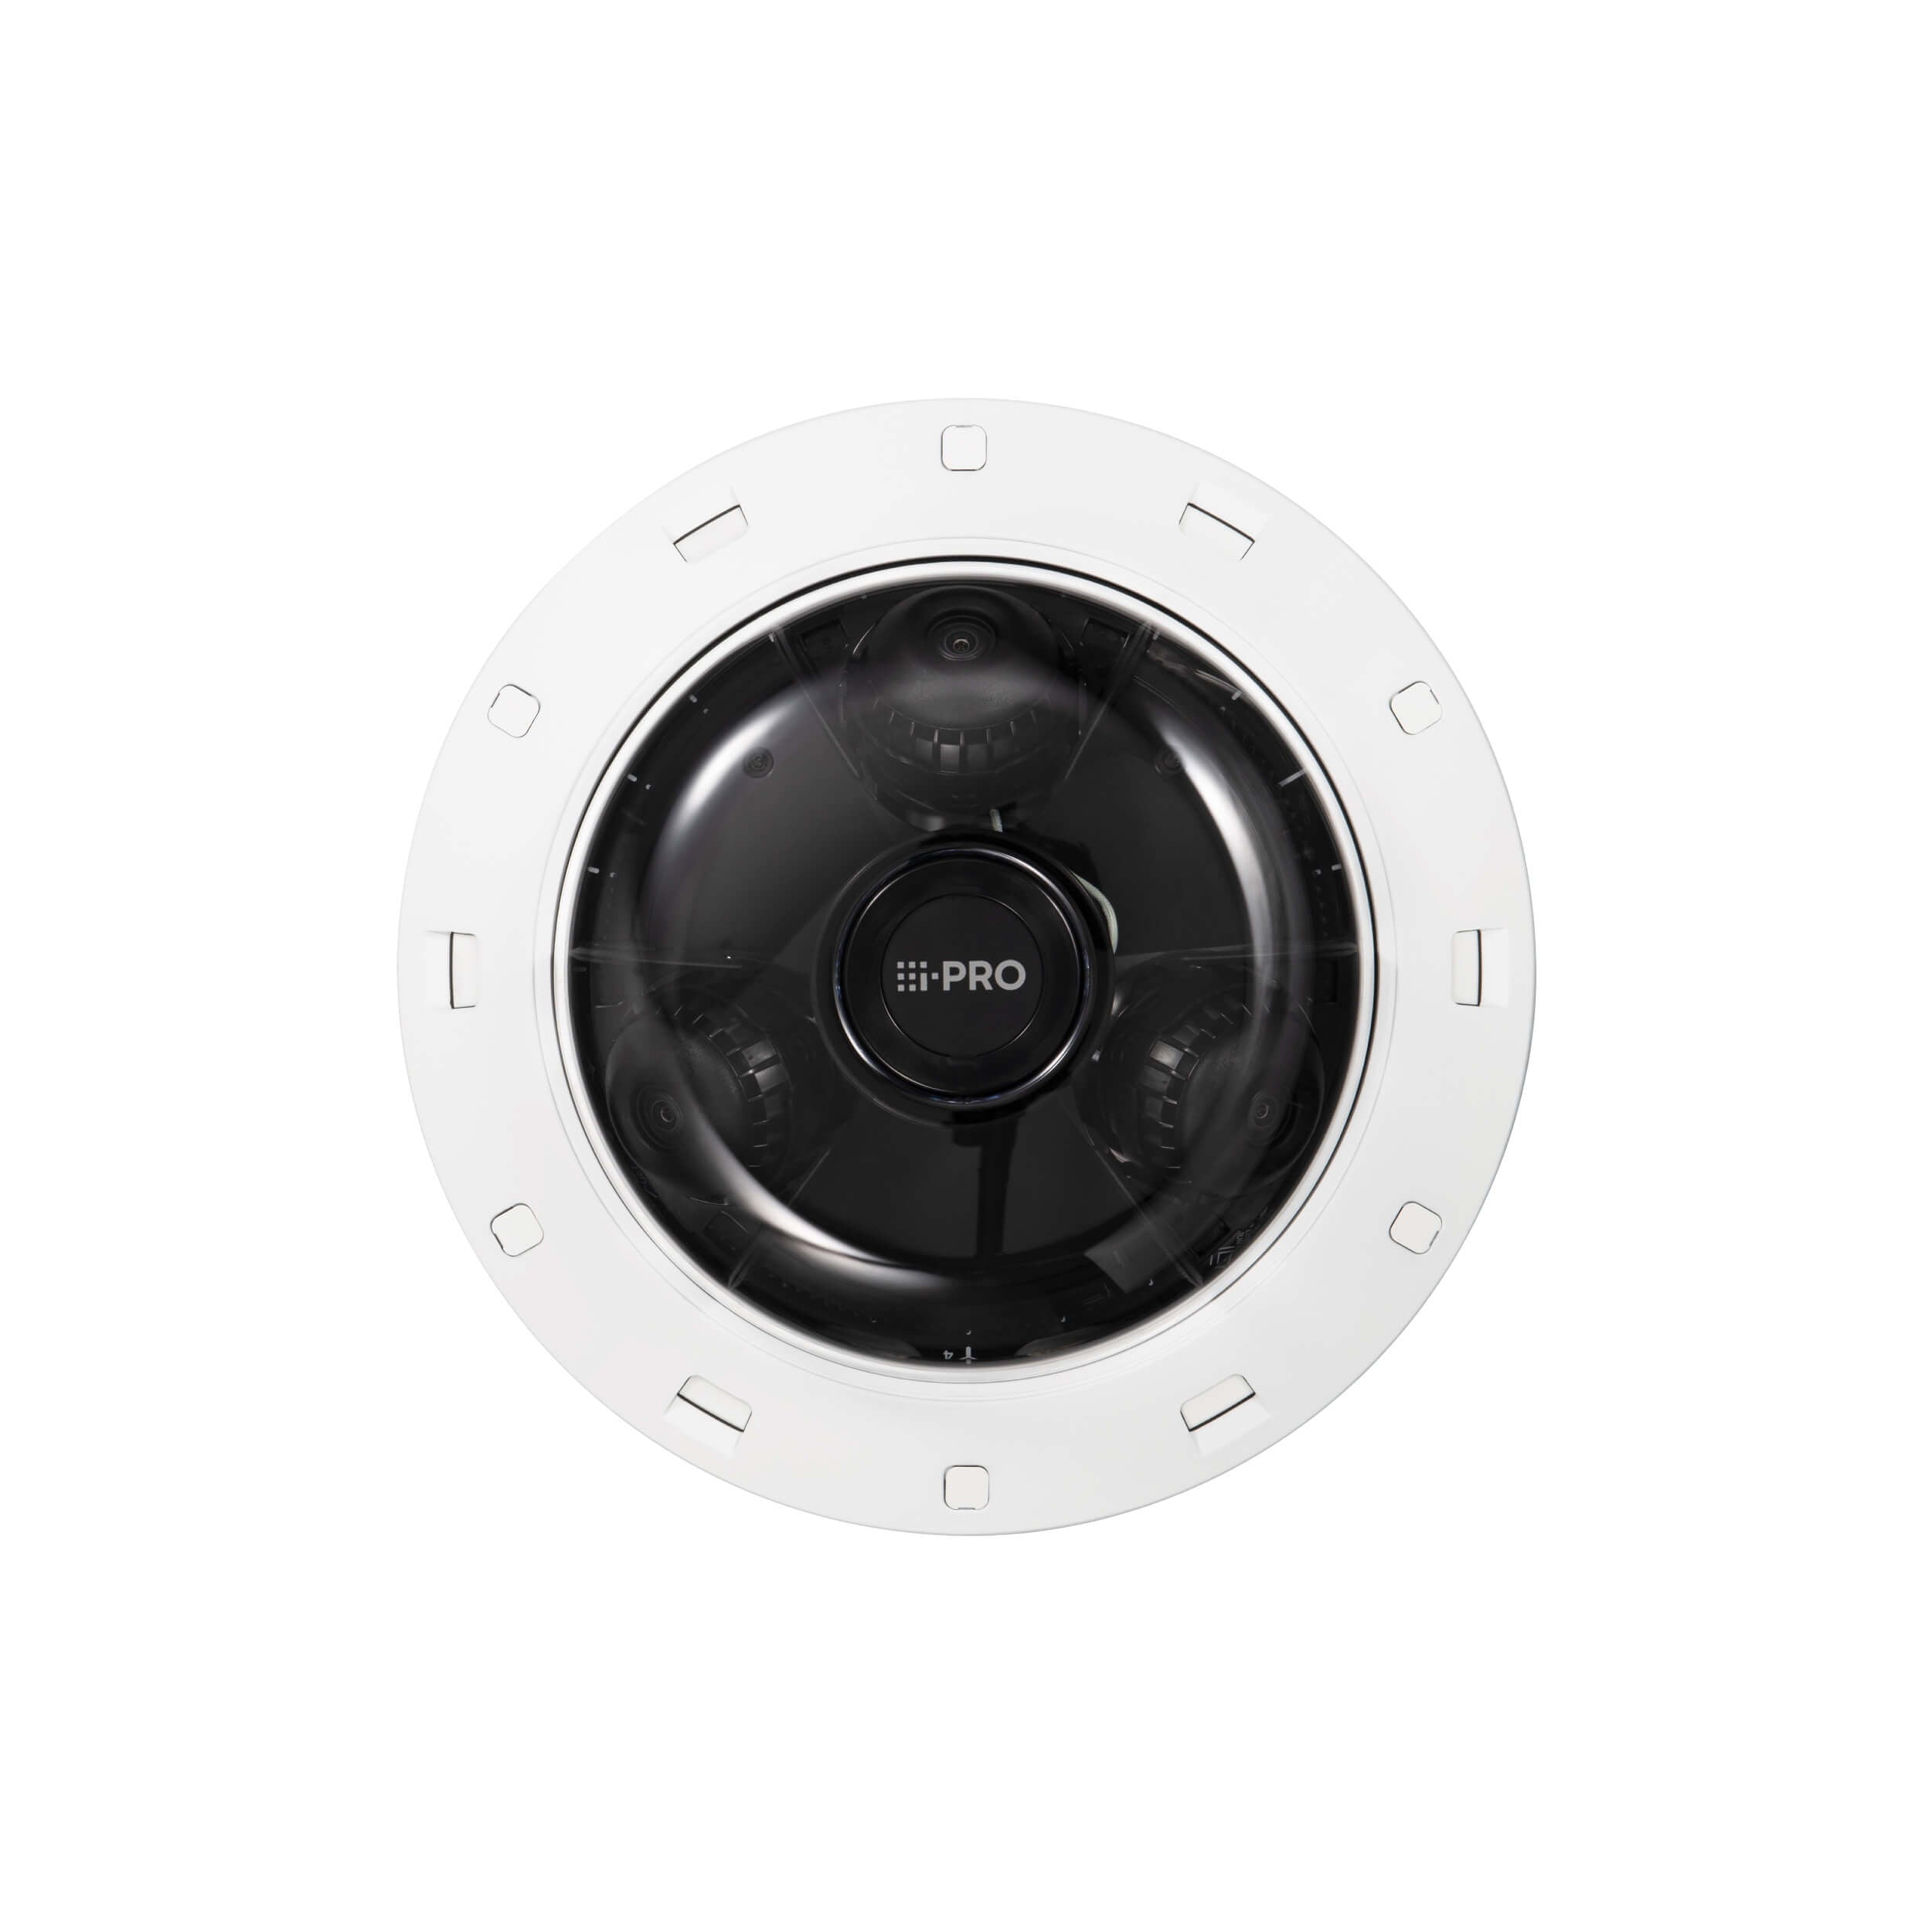 Panasonic WV-S8544LG 16 Megapixel Network IR Outdoor Dome Camera with 2.9-7.3mm Lens